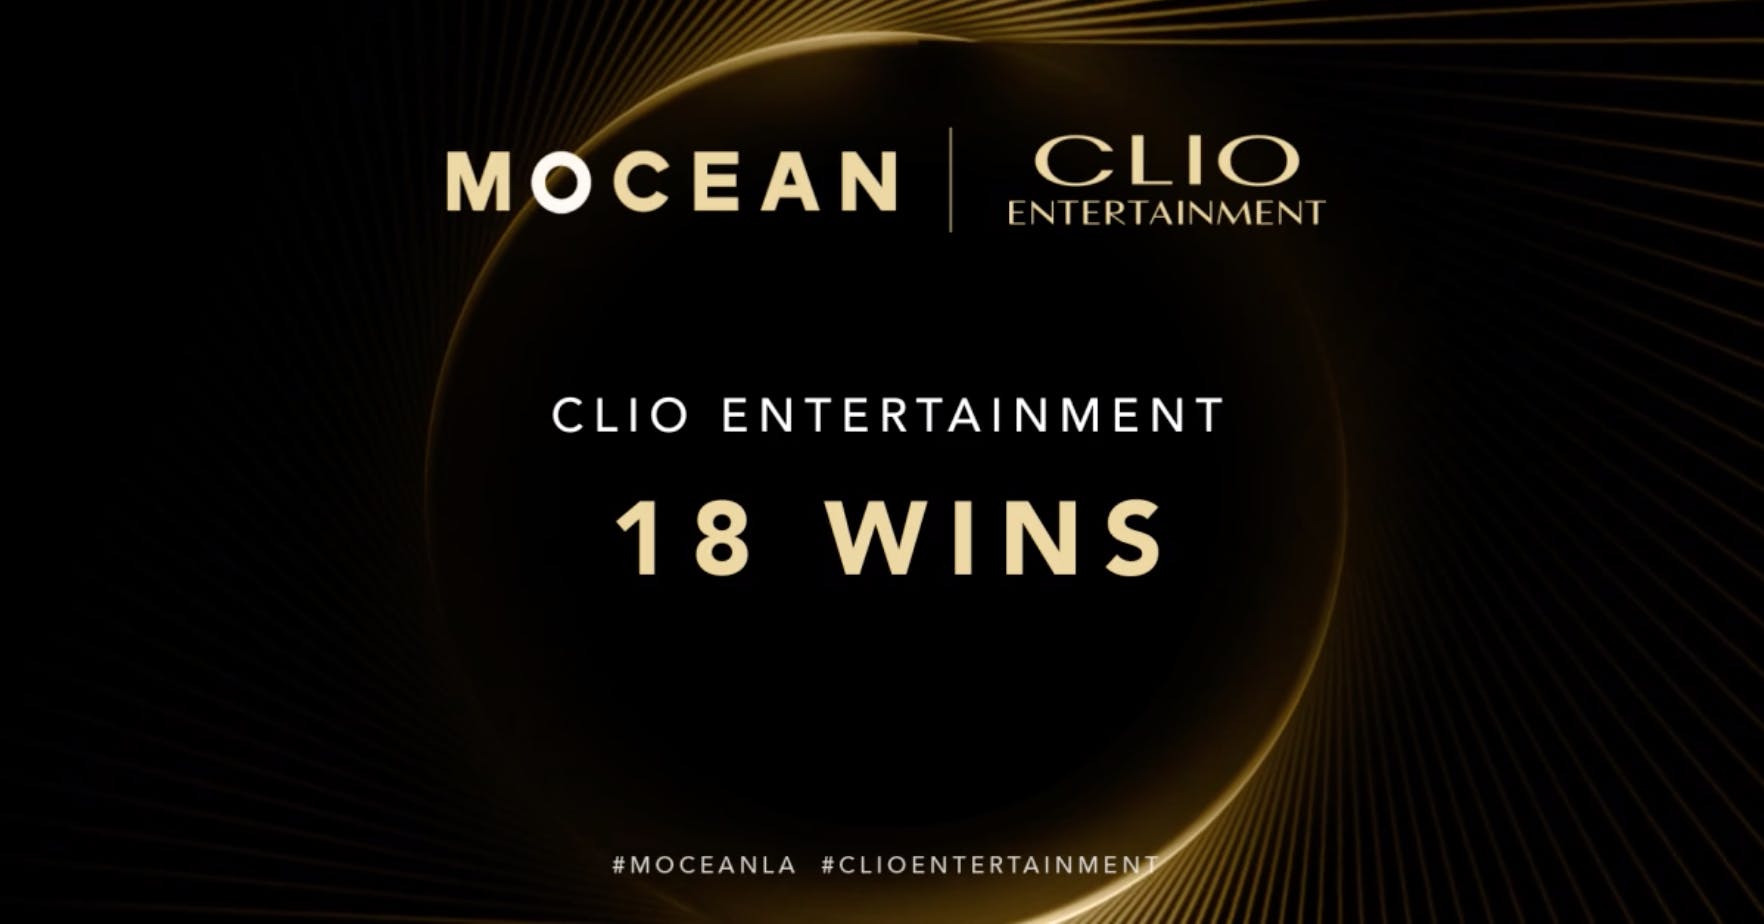 MOCEAN Takes Home 18 Wins From the 2019 CLIO Entertainment Awards hero image